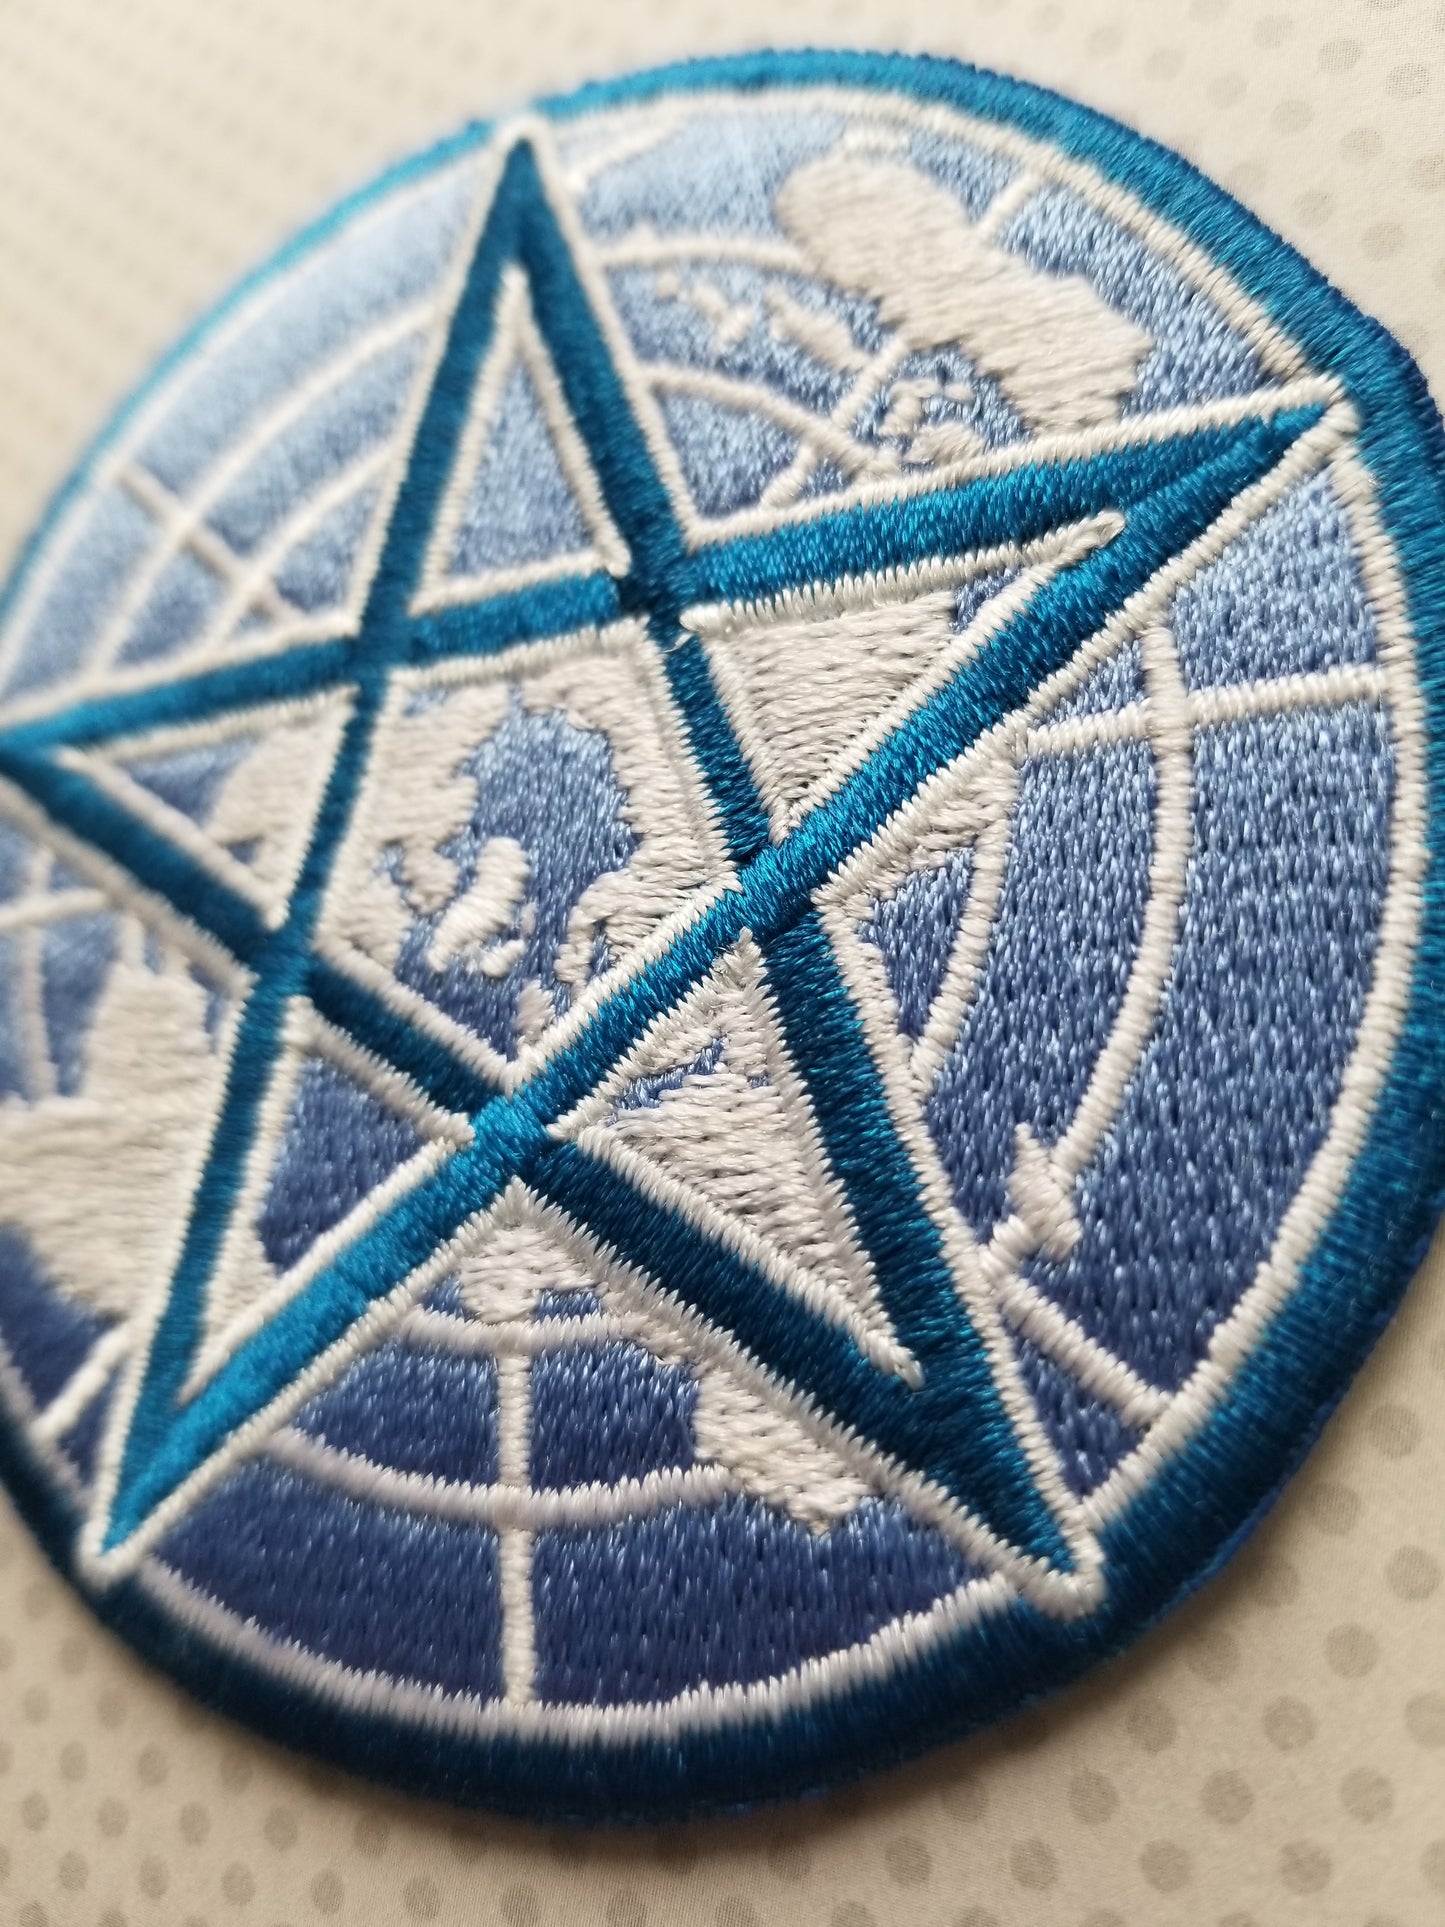 Global Occult Coalition Patch